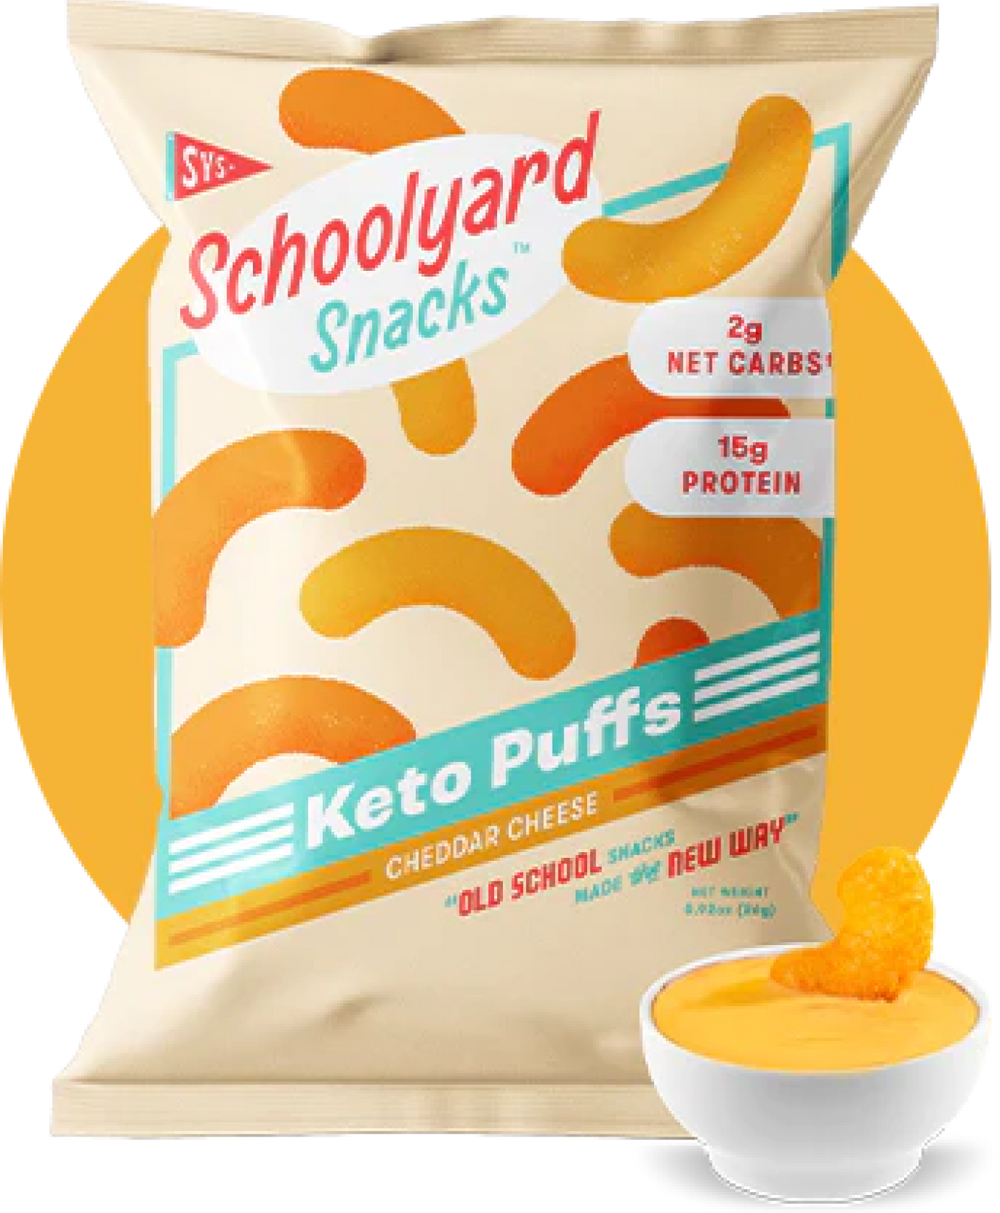 Free snack samples for reviews